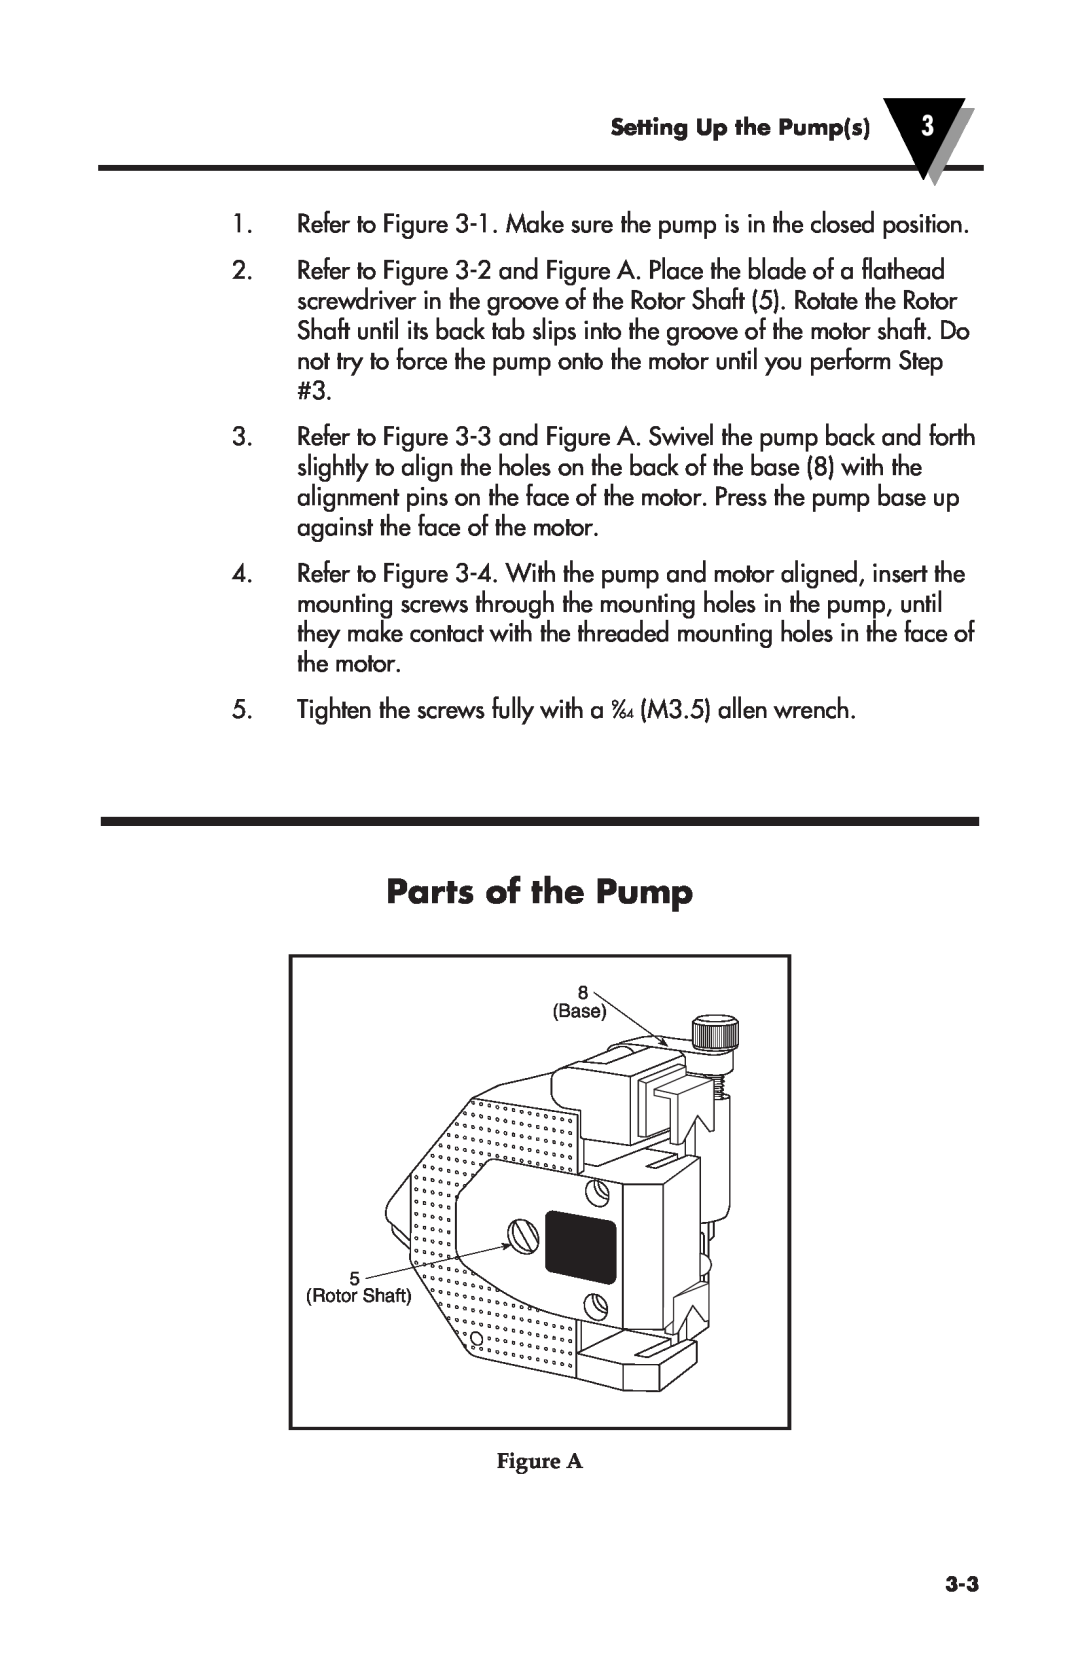 Omega Vehicle Security FPU500 manual Parts of the Pump, Setting Up the Pumps 